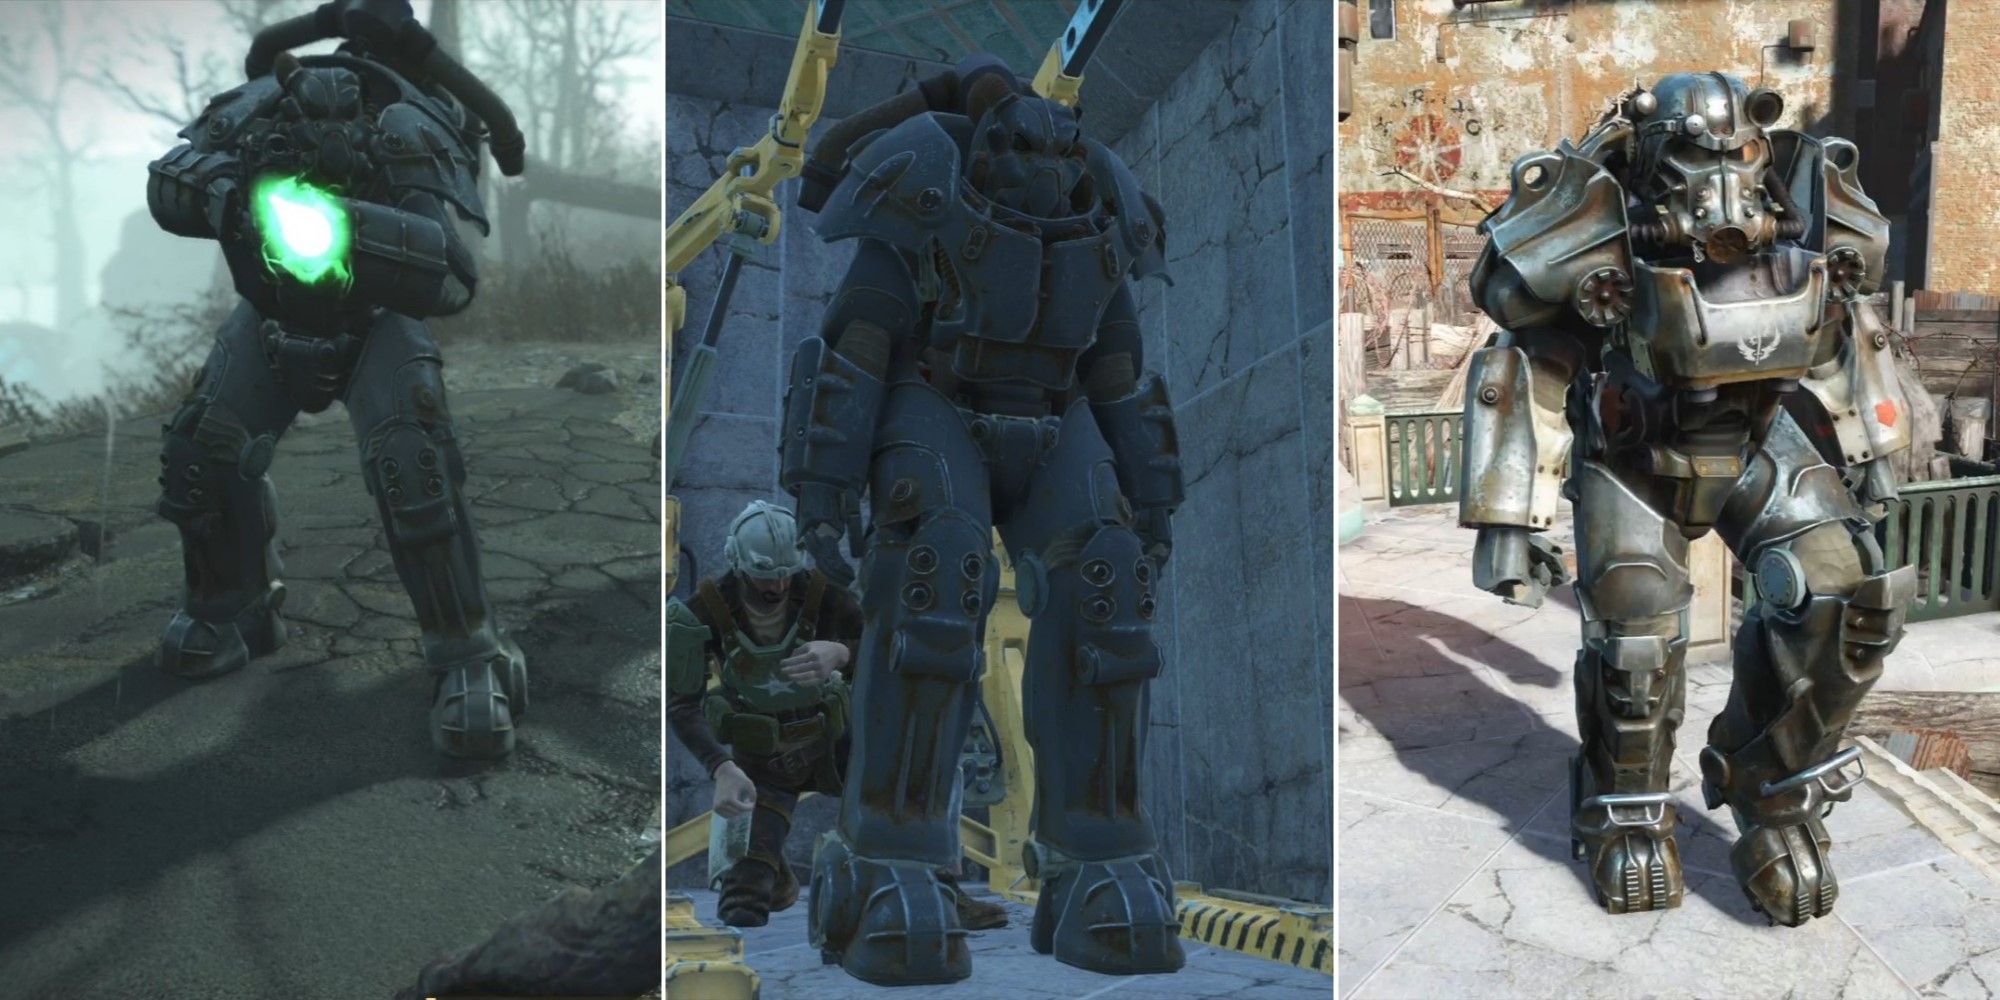 a collage of images of power armor from Fallout 4